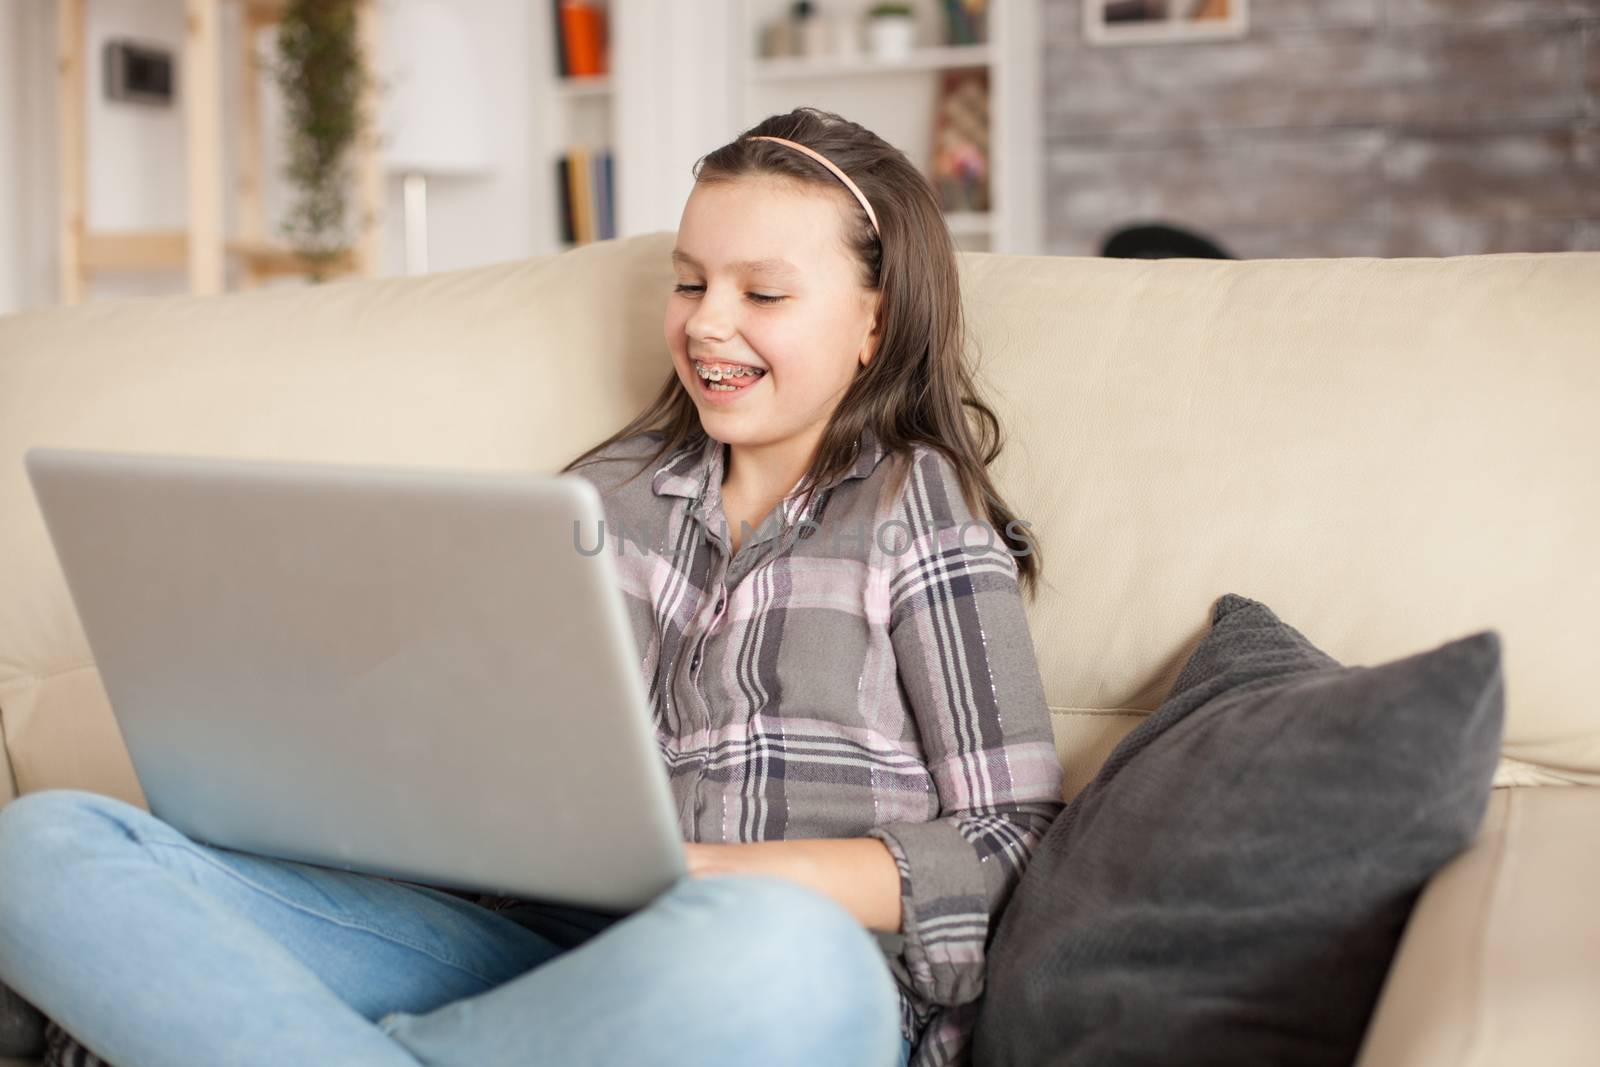 Smiling little girl with braces using her laptop in living room. Cheerful child.